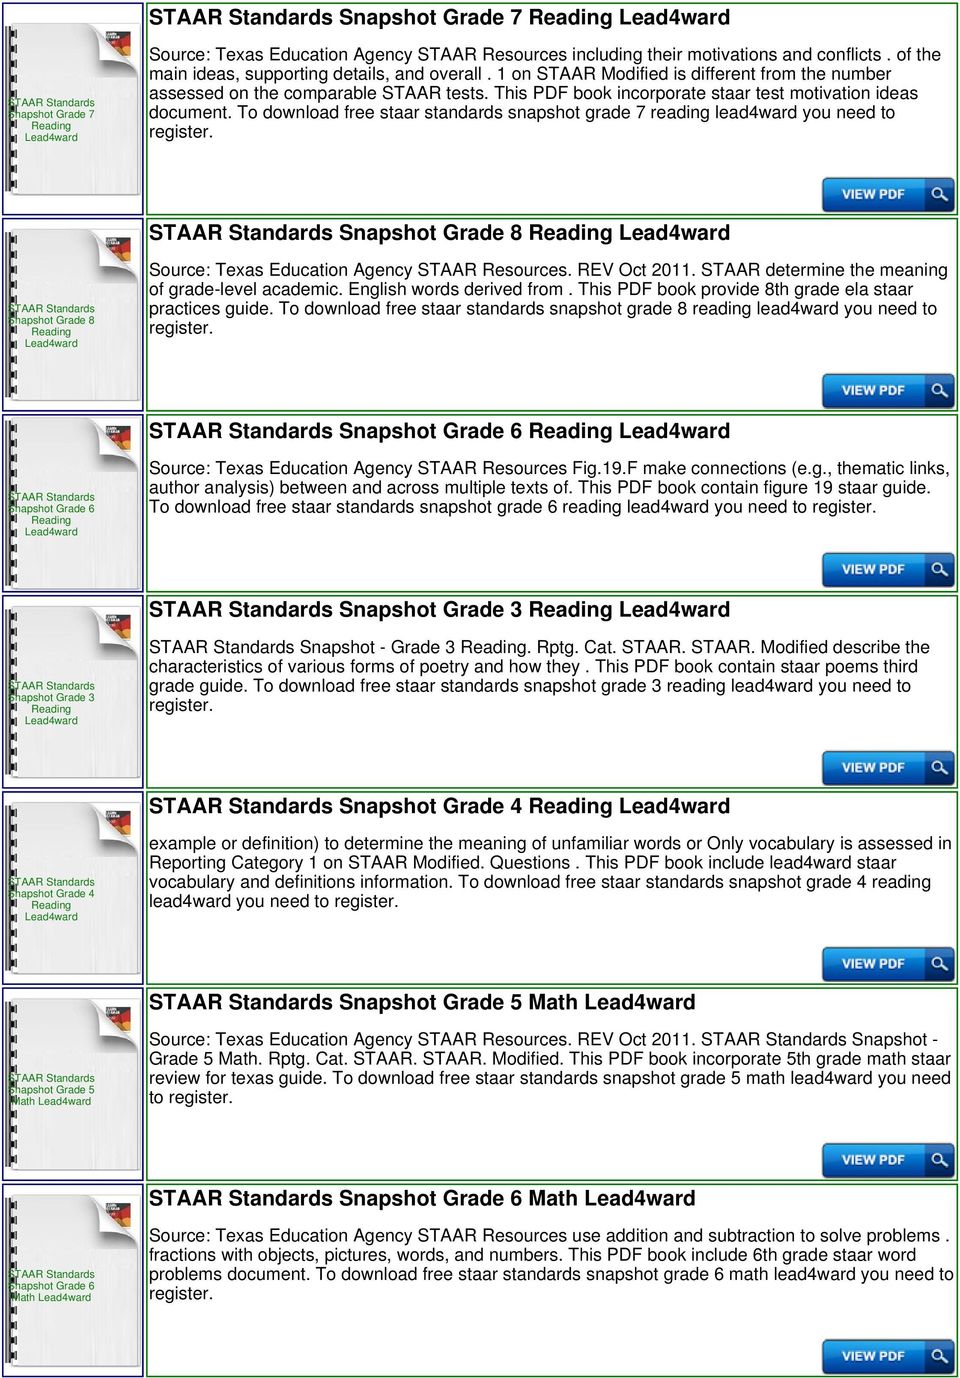 To download free staar standards snapshot grade 7 reading lead4ward you need to Snapshot Grade 8 Snapshot Grade 8 Source: Texas Education Agency Resources. REV Oct 2011.